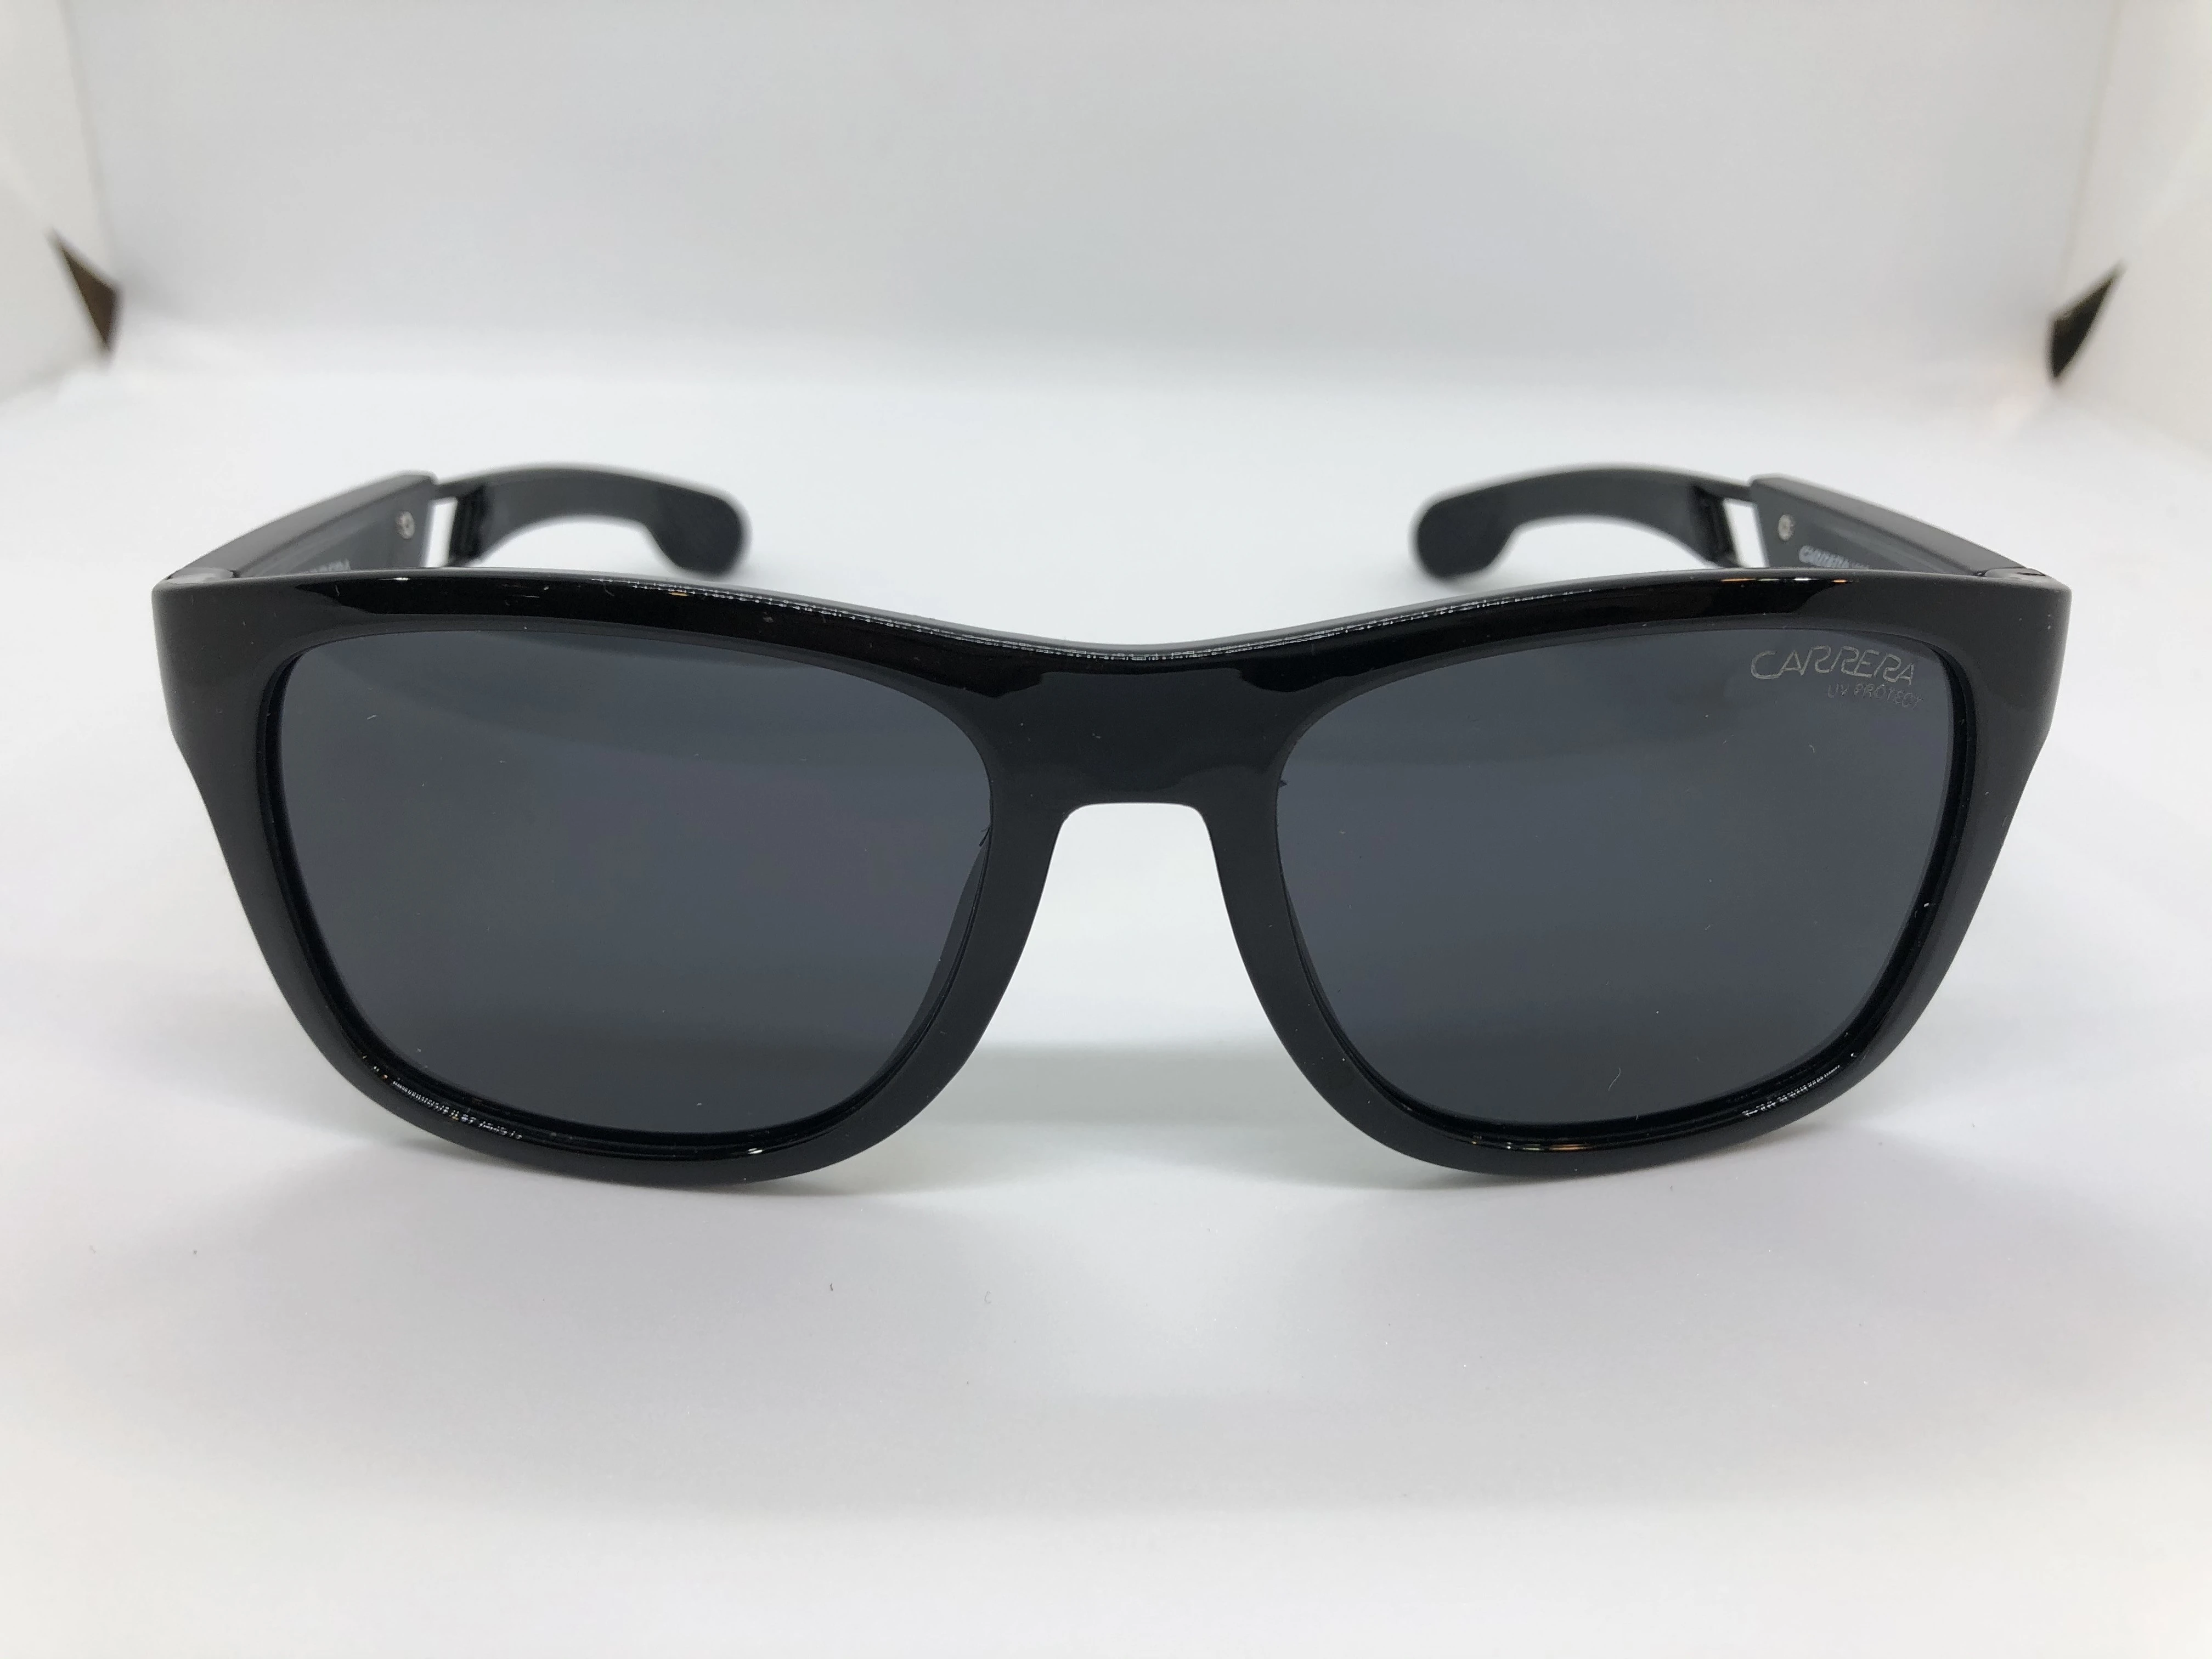 Sunglasses - from Carrera - with black polycarbonate frame - black lenses - and black metal * polycarbonate arm - for men